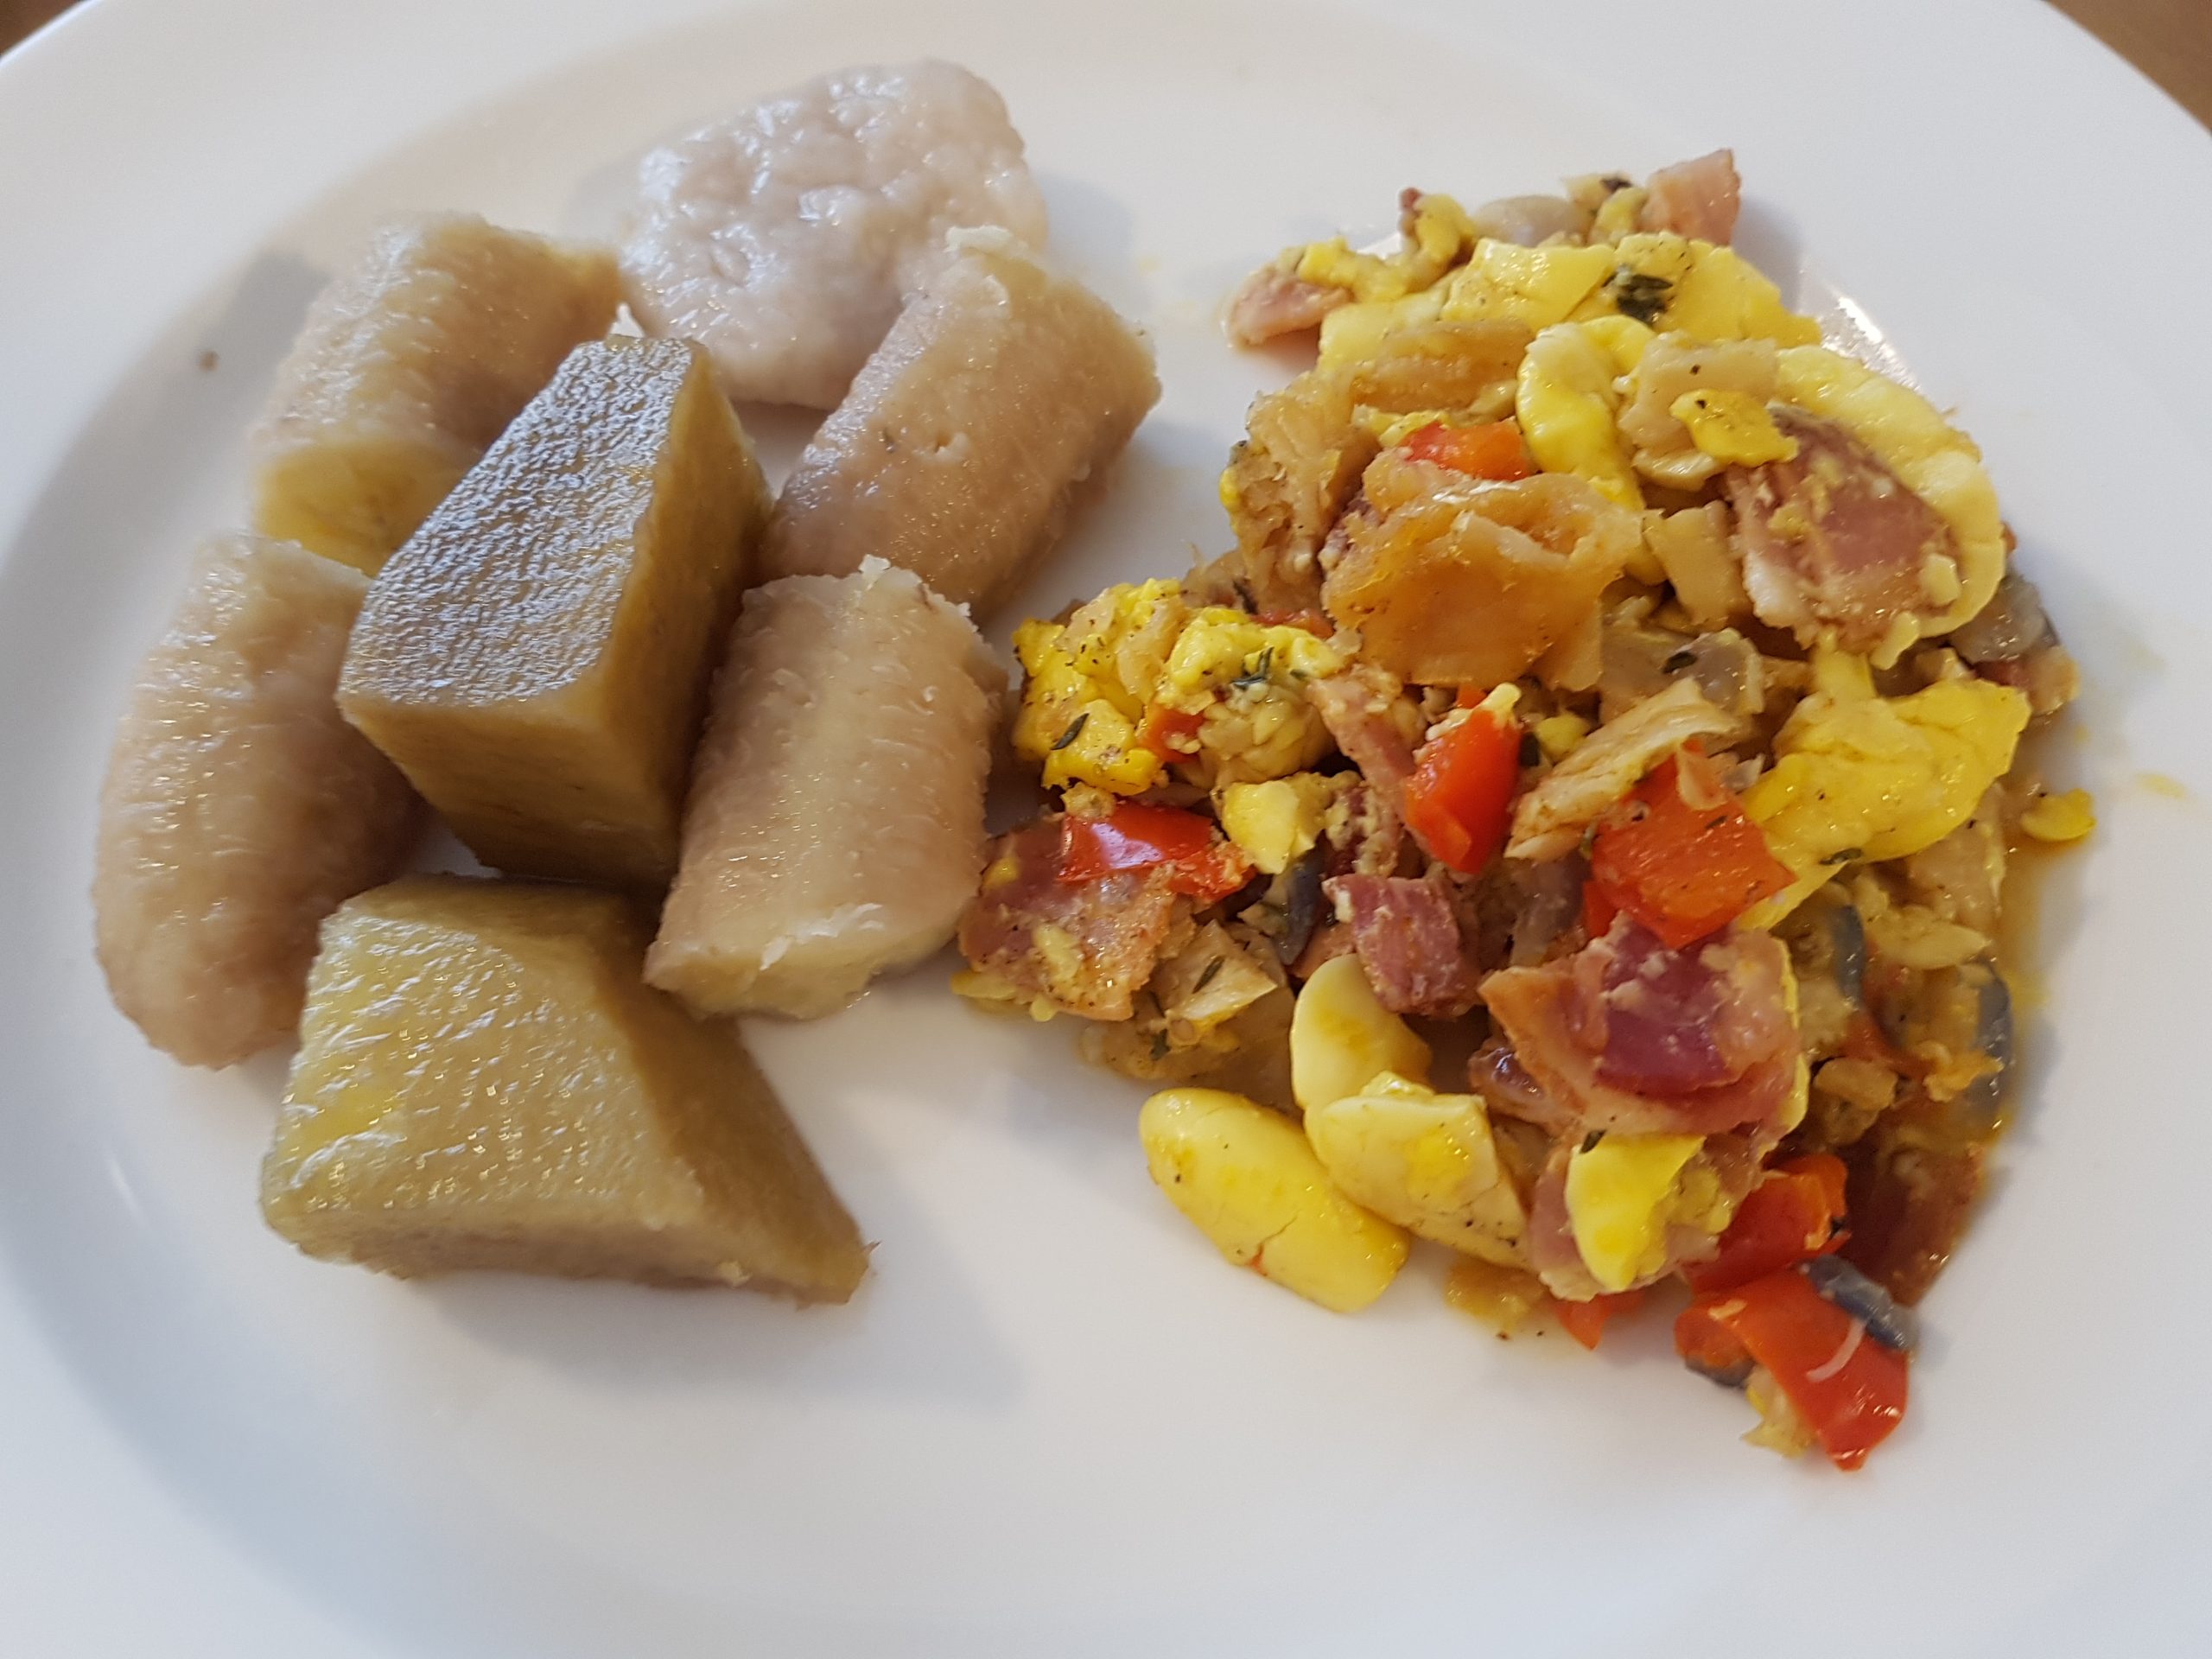 how to prepare ackee and saltfish